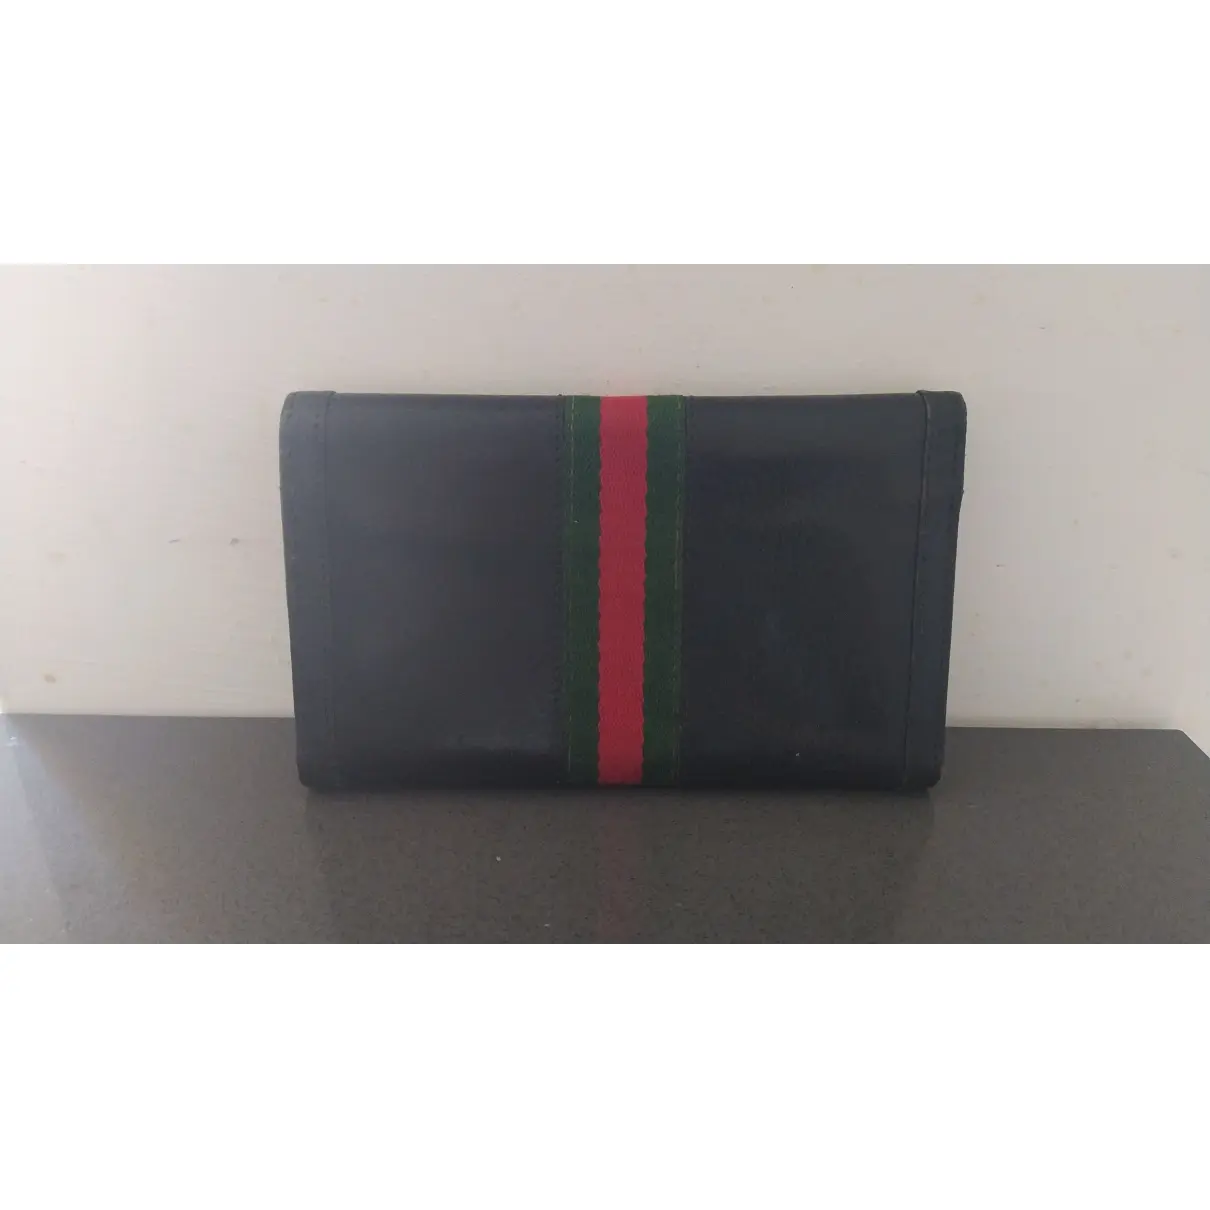 Buy Gucci Leather wallet online